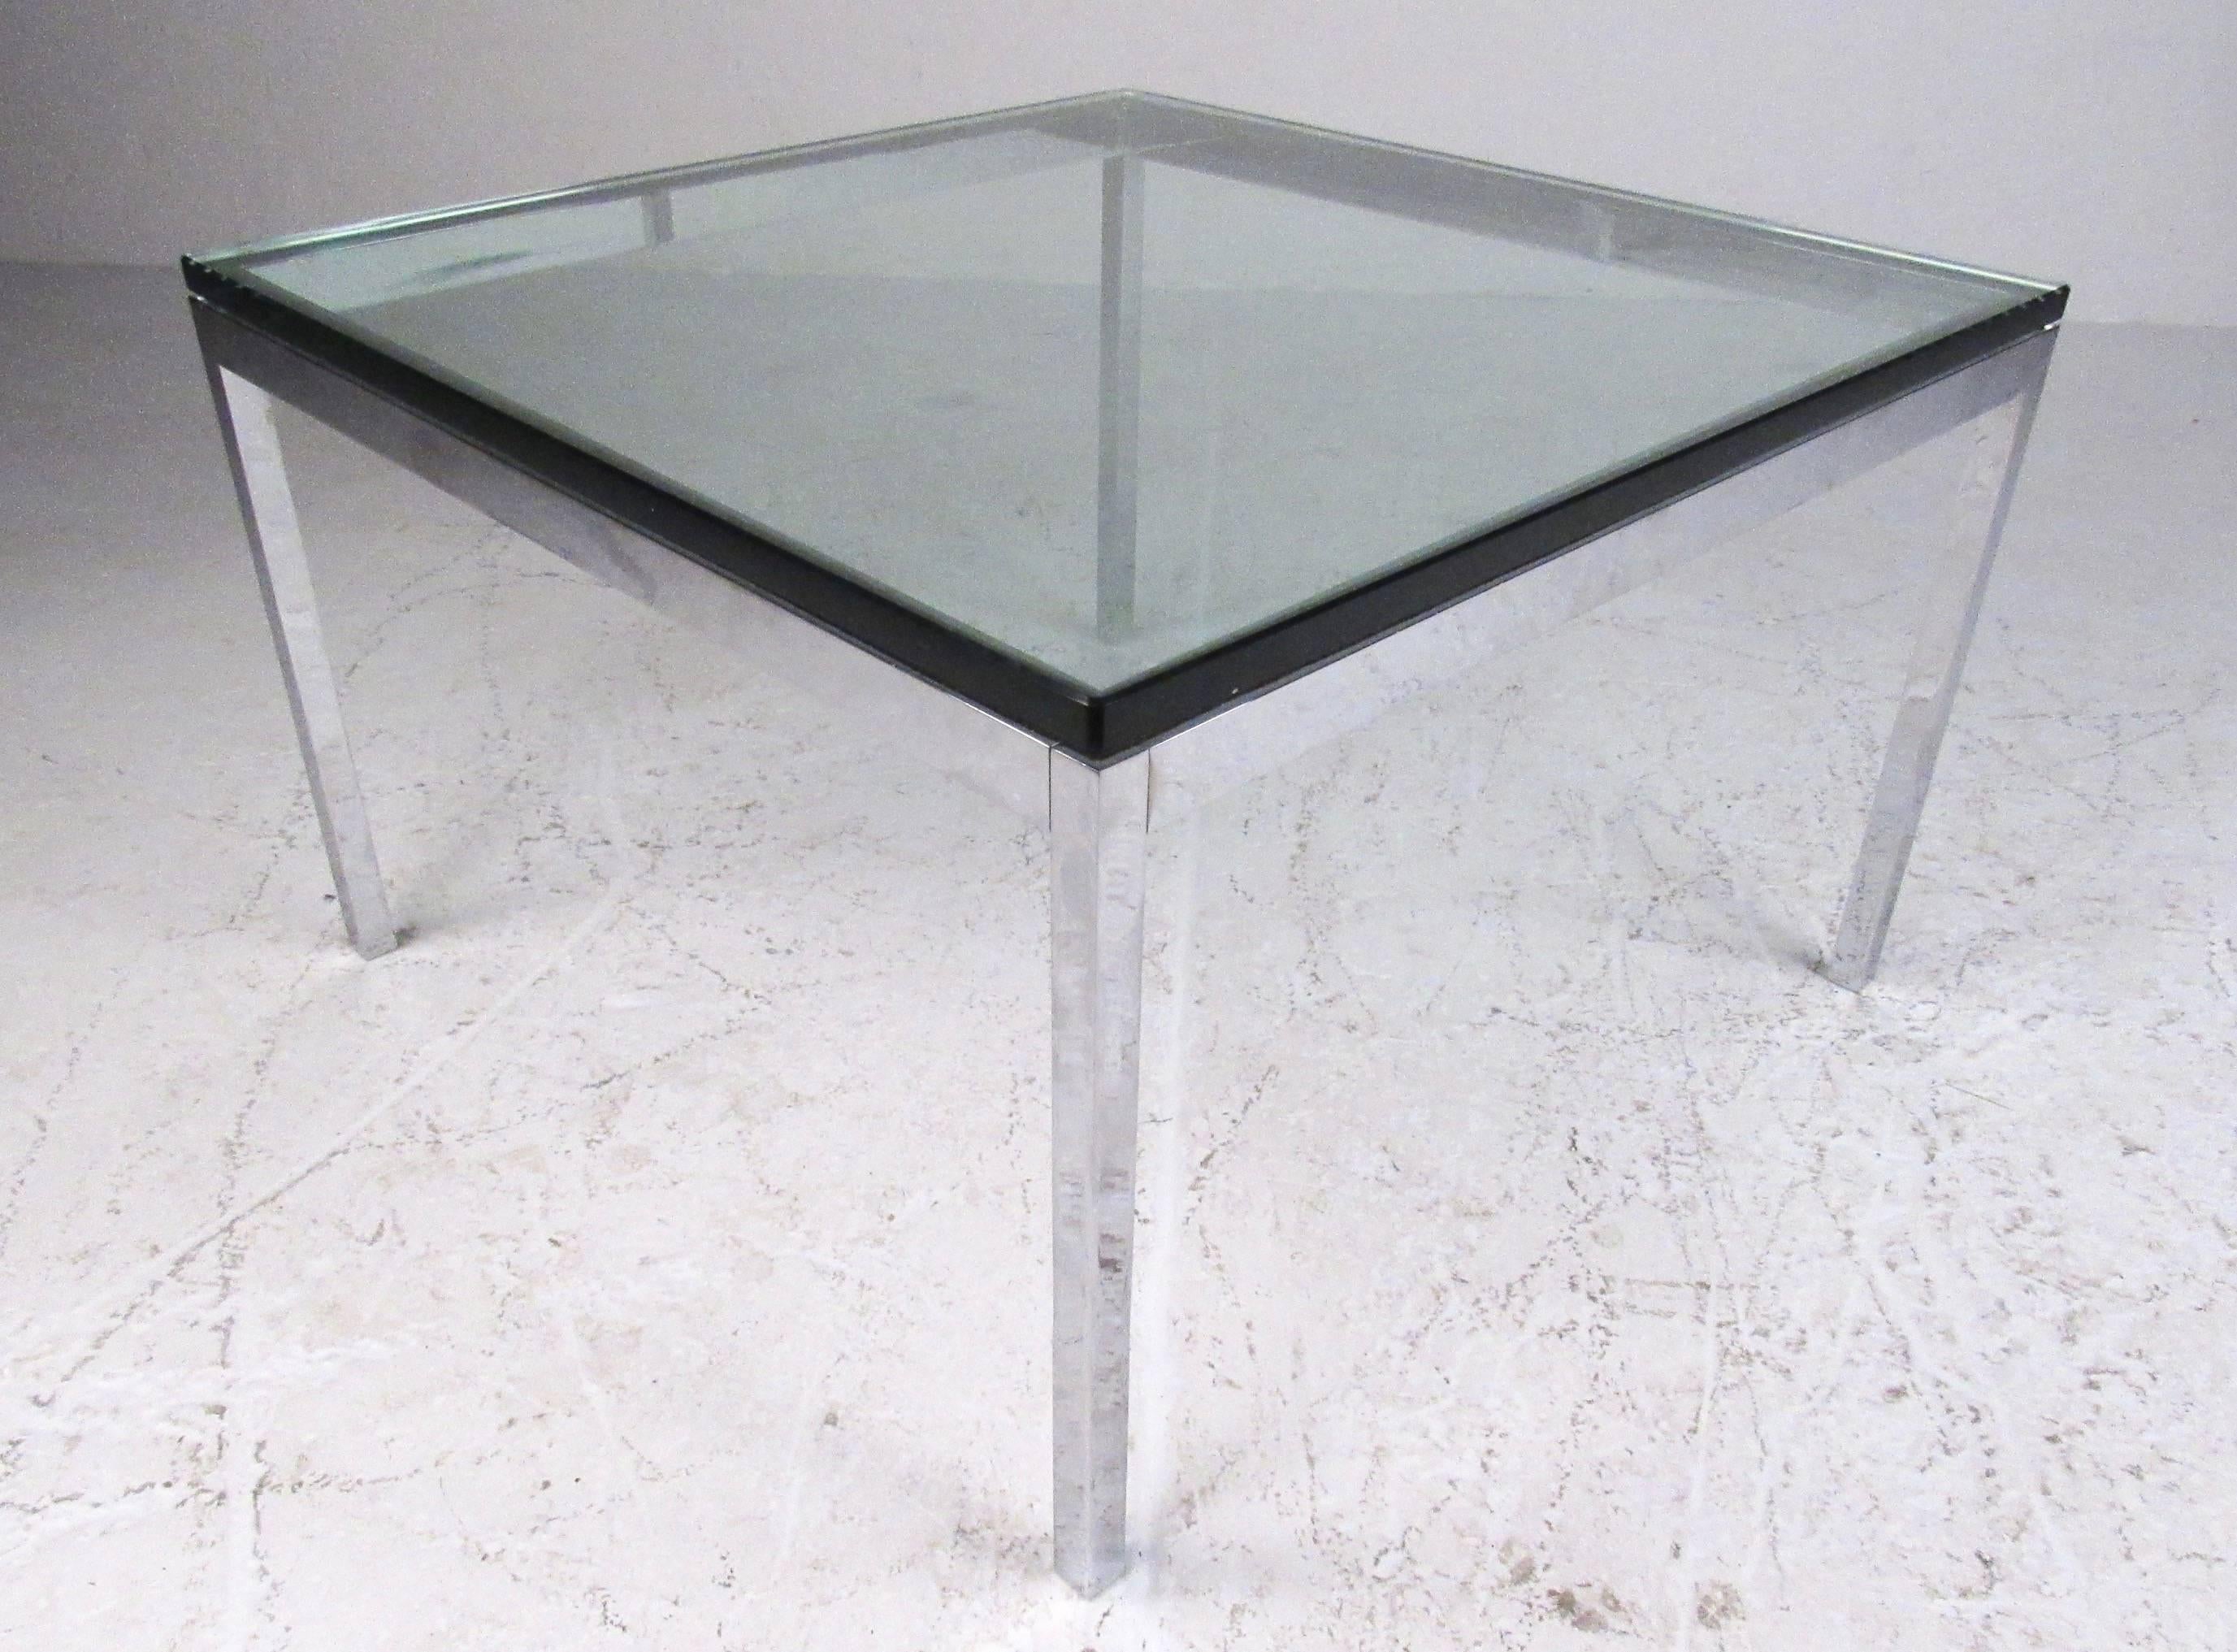 This stylish pair of vintage modern tables feature chrome and beveled glass construction, perfectly complimenting the mid-century design. Well suited as matching coffee tables or lamp tables. Please confirm item location (NY or NJ). 